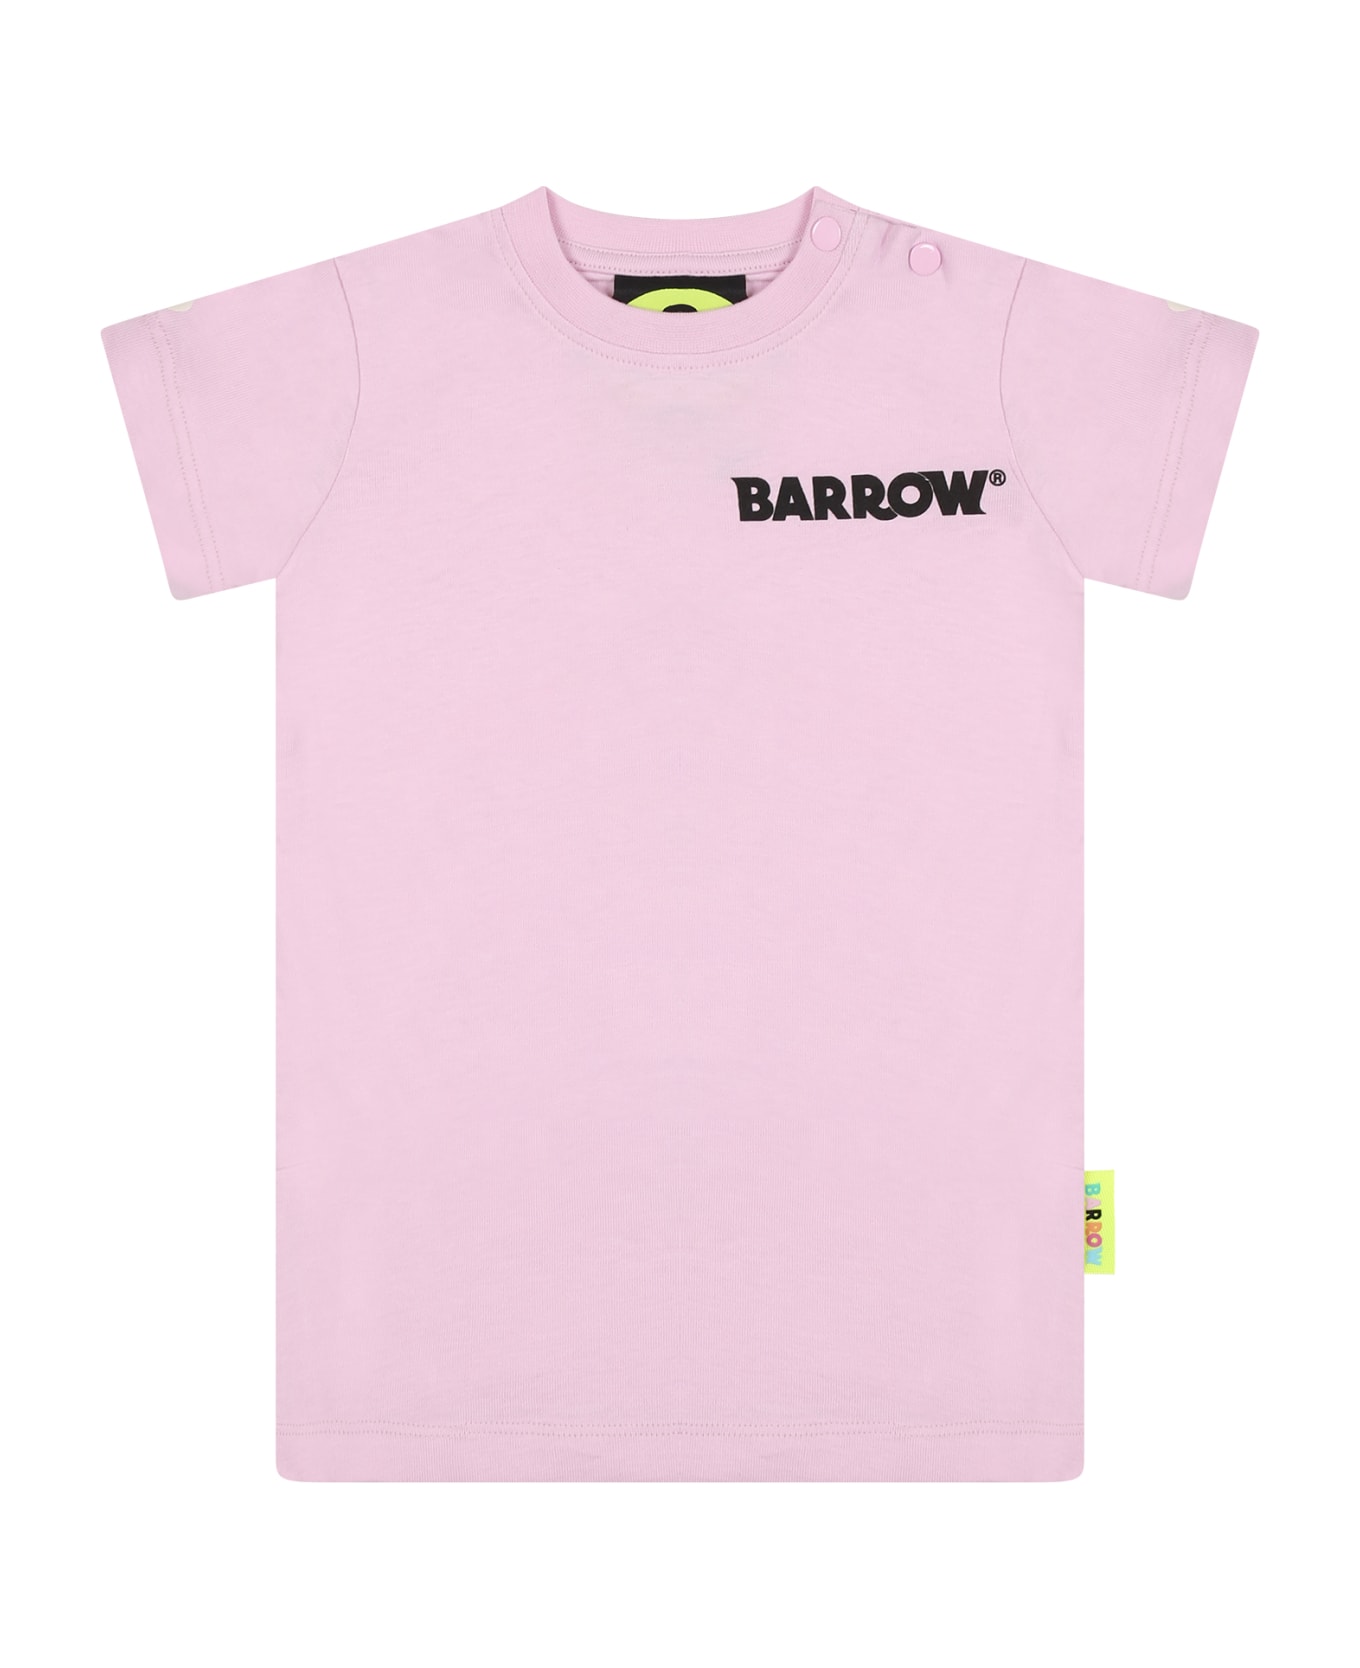 Barrow Pink Dress For Baby Girl With Logo - Pink ウェア